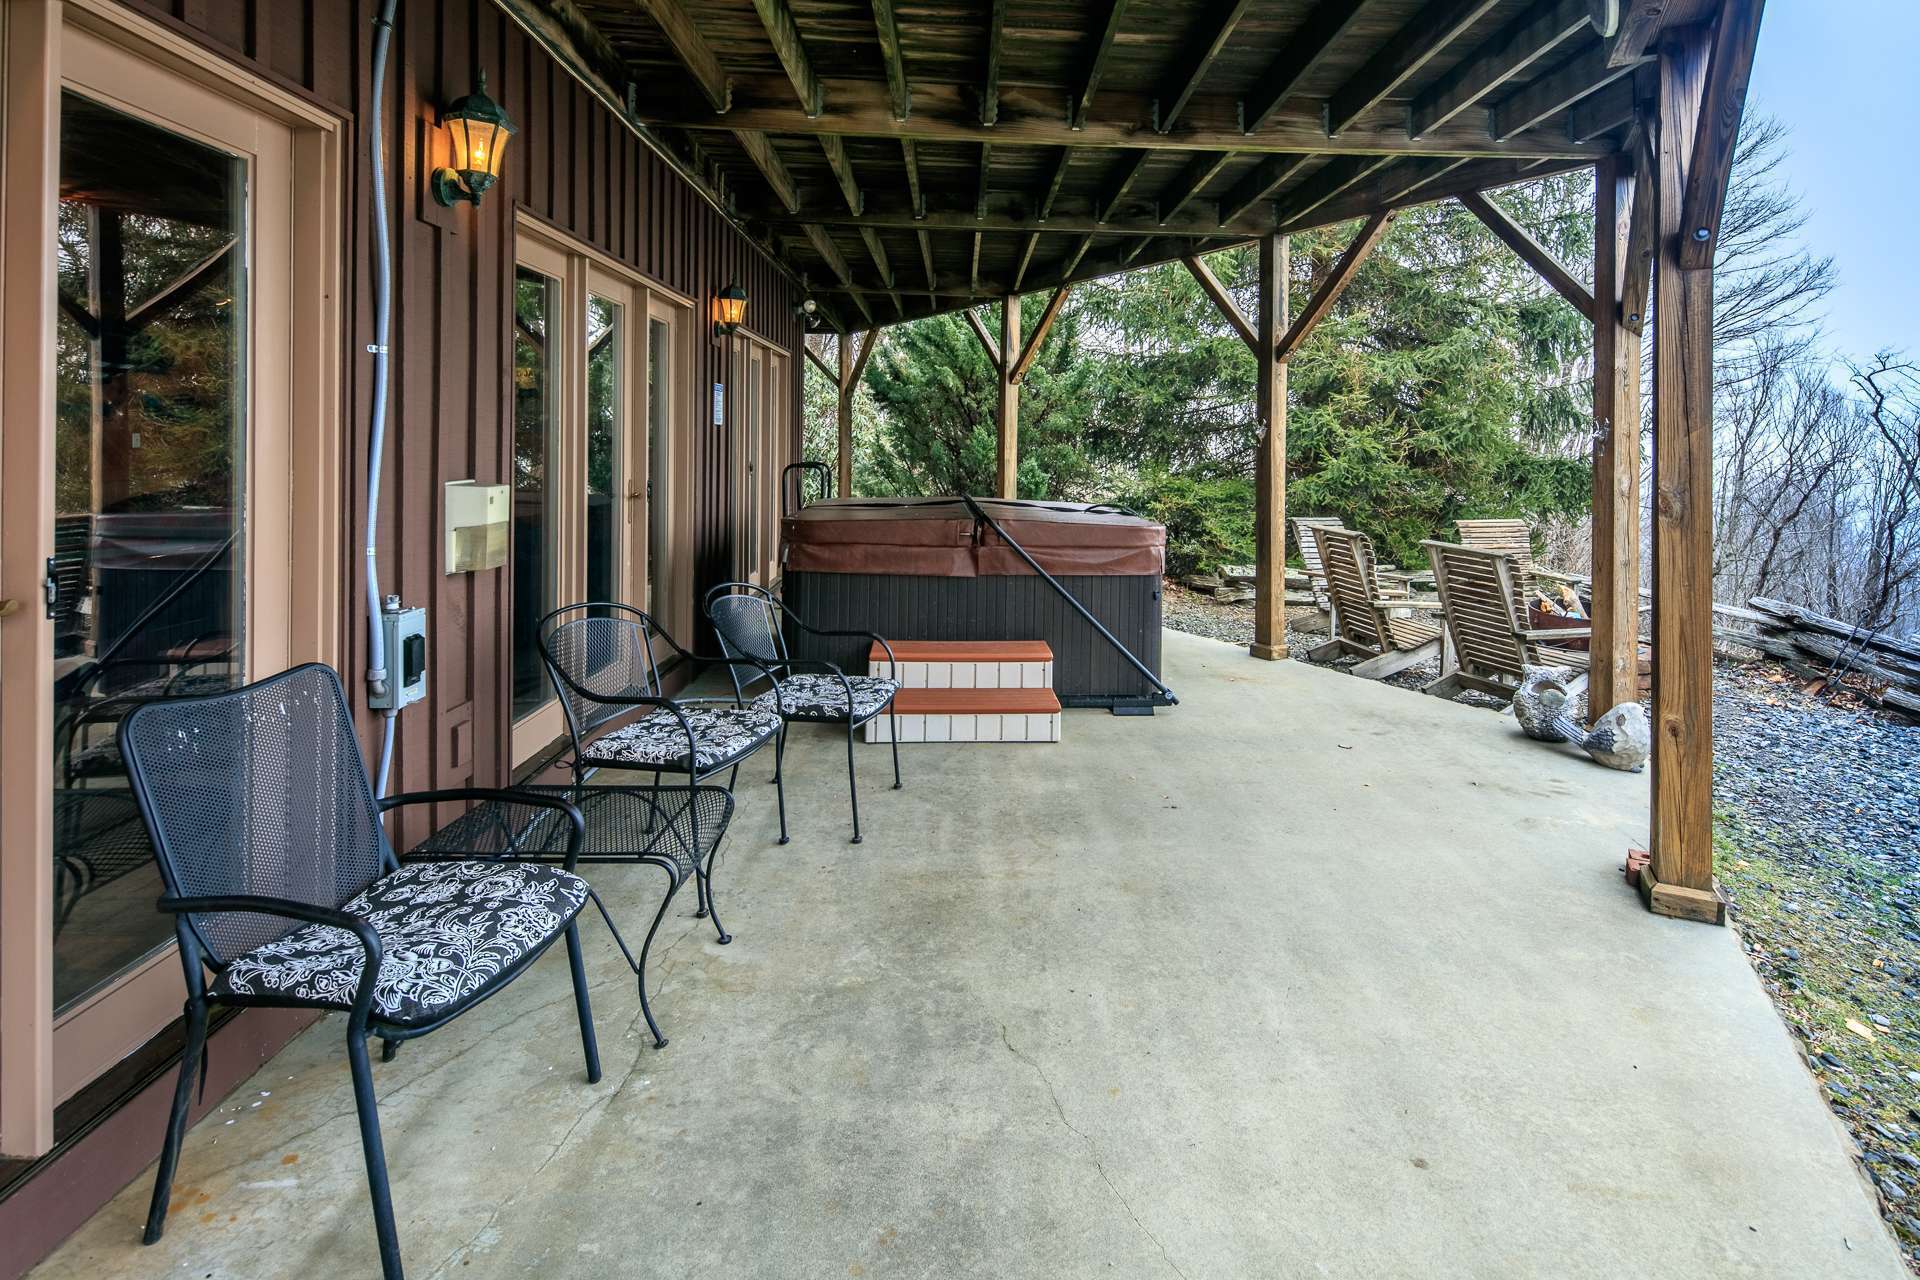 This lower level patio is access from the living area and offers another private place to relax in the hot tub while  enjoying the views.